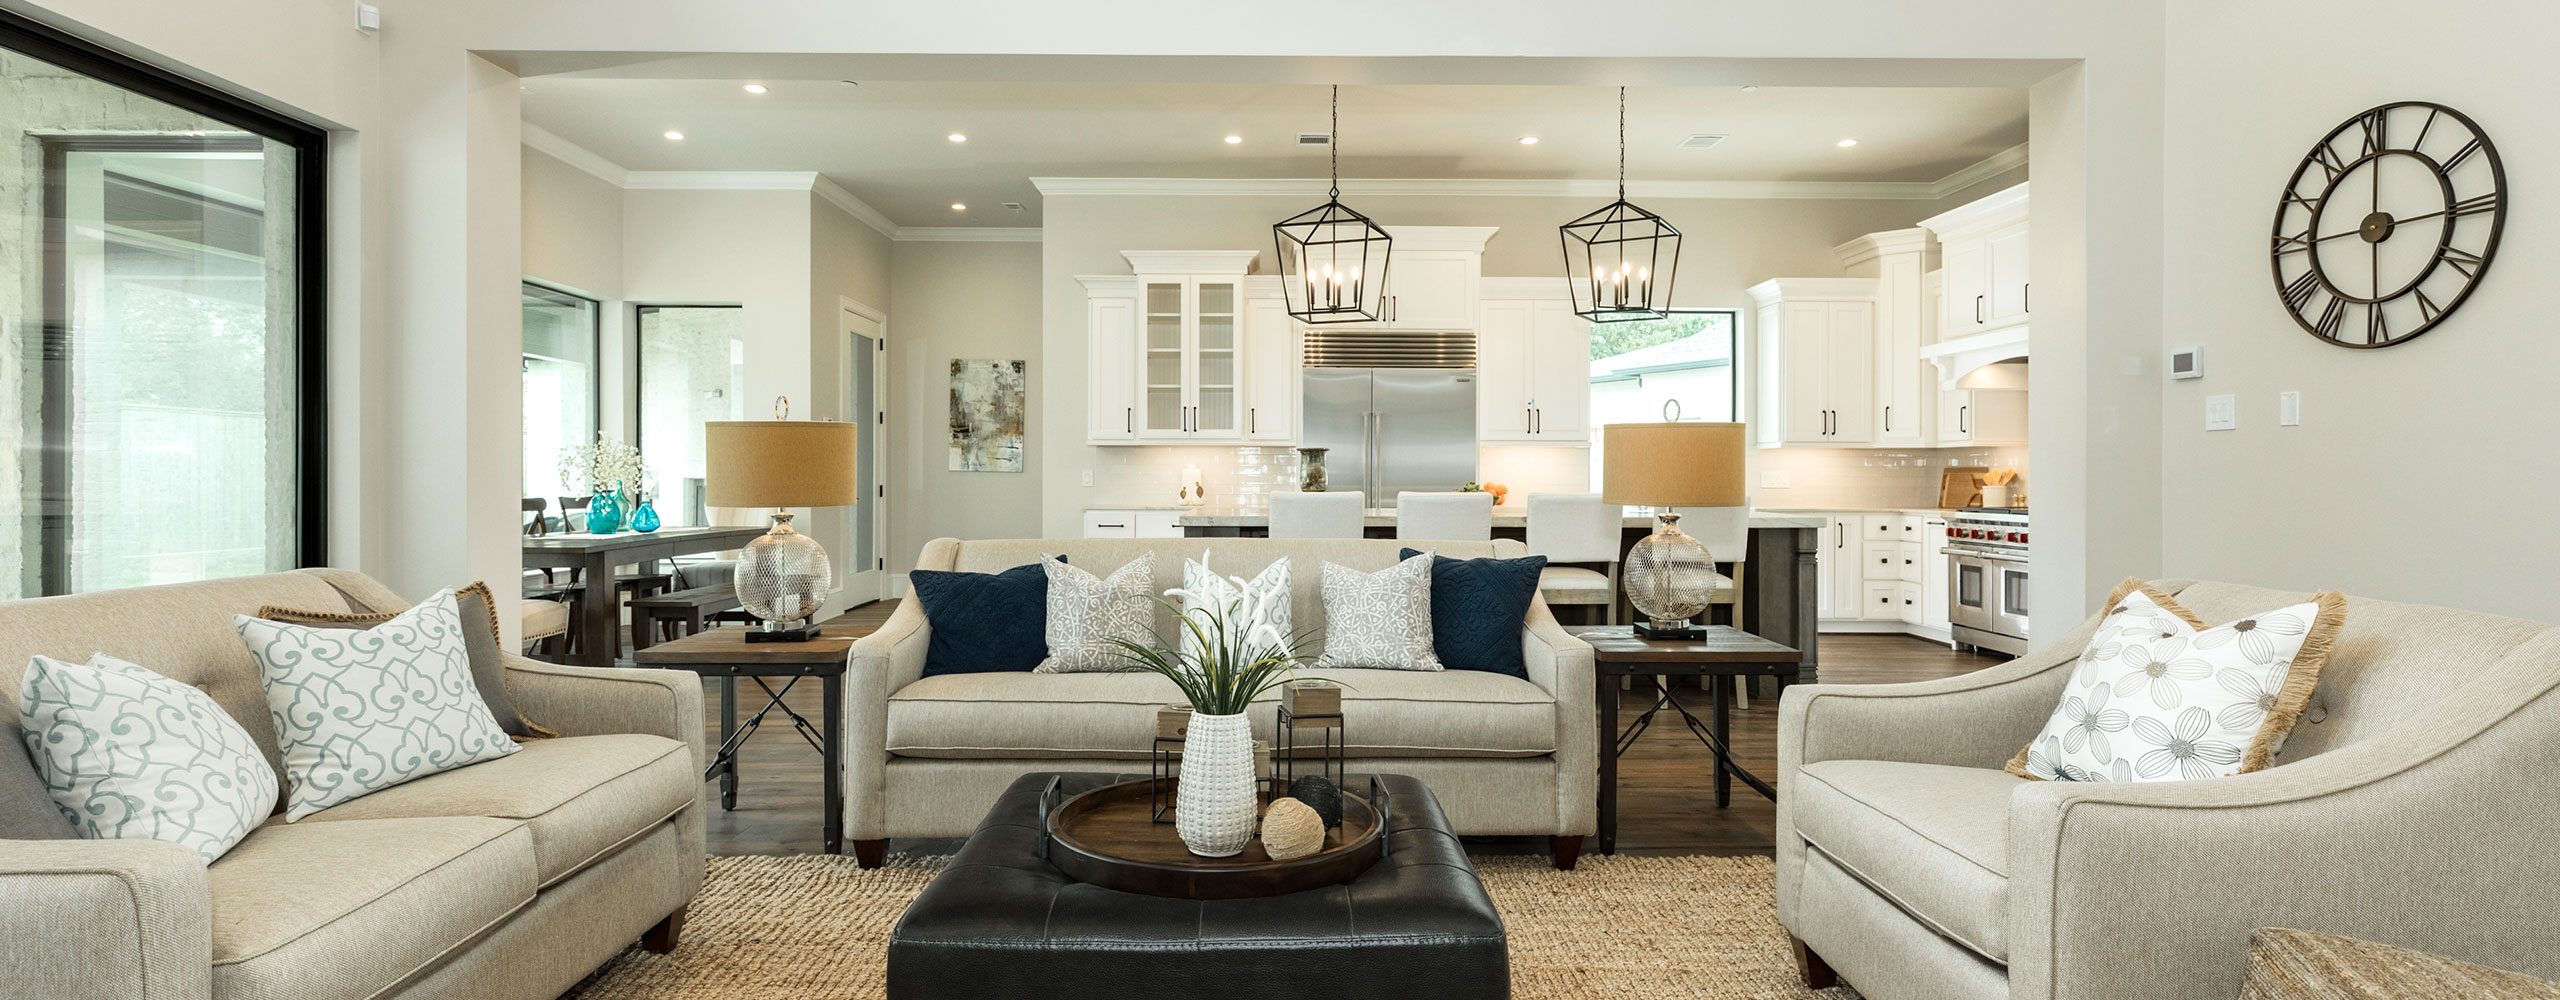 Family room staging in Houston, Texas